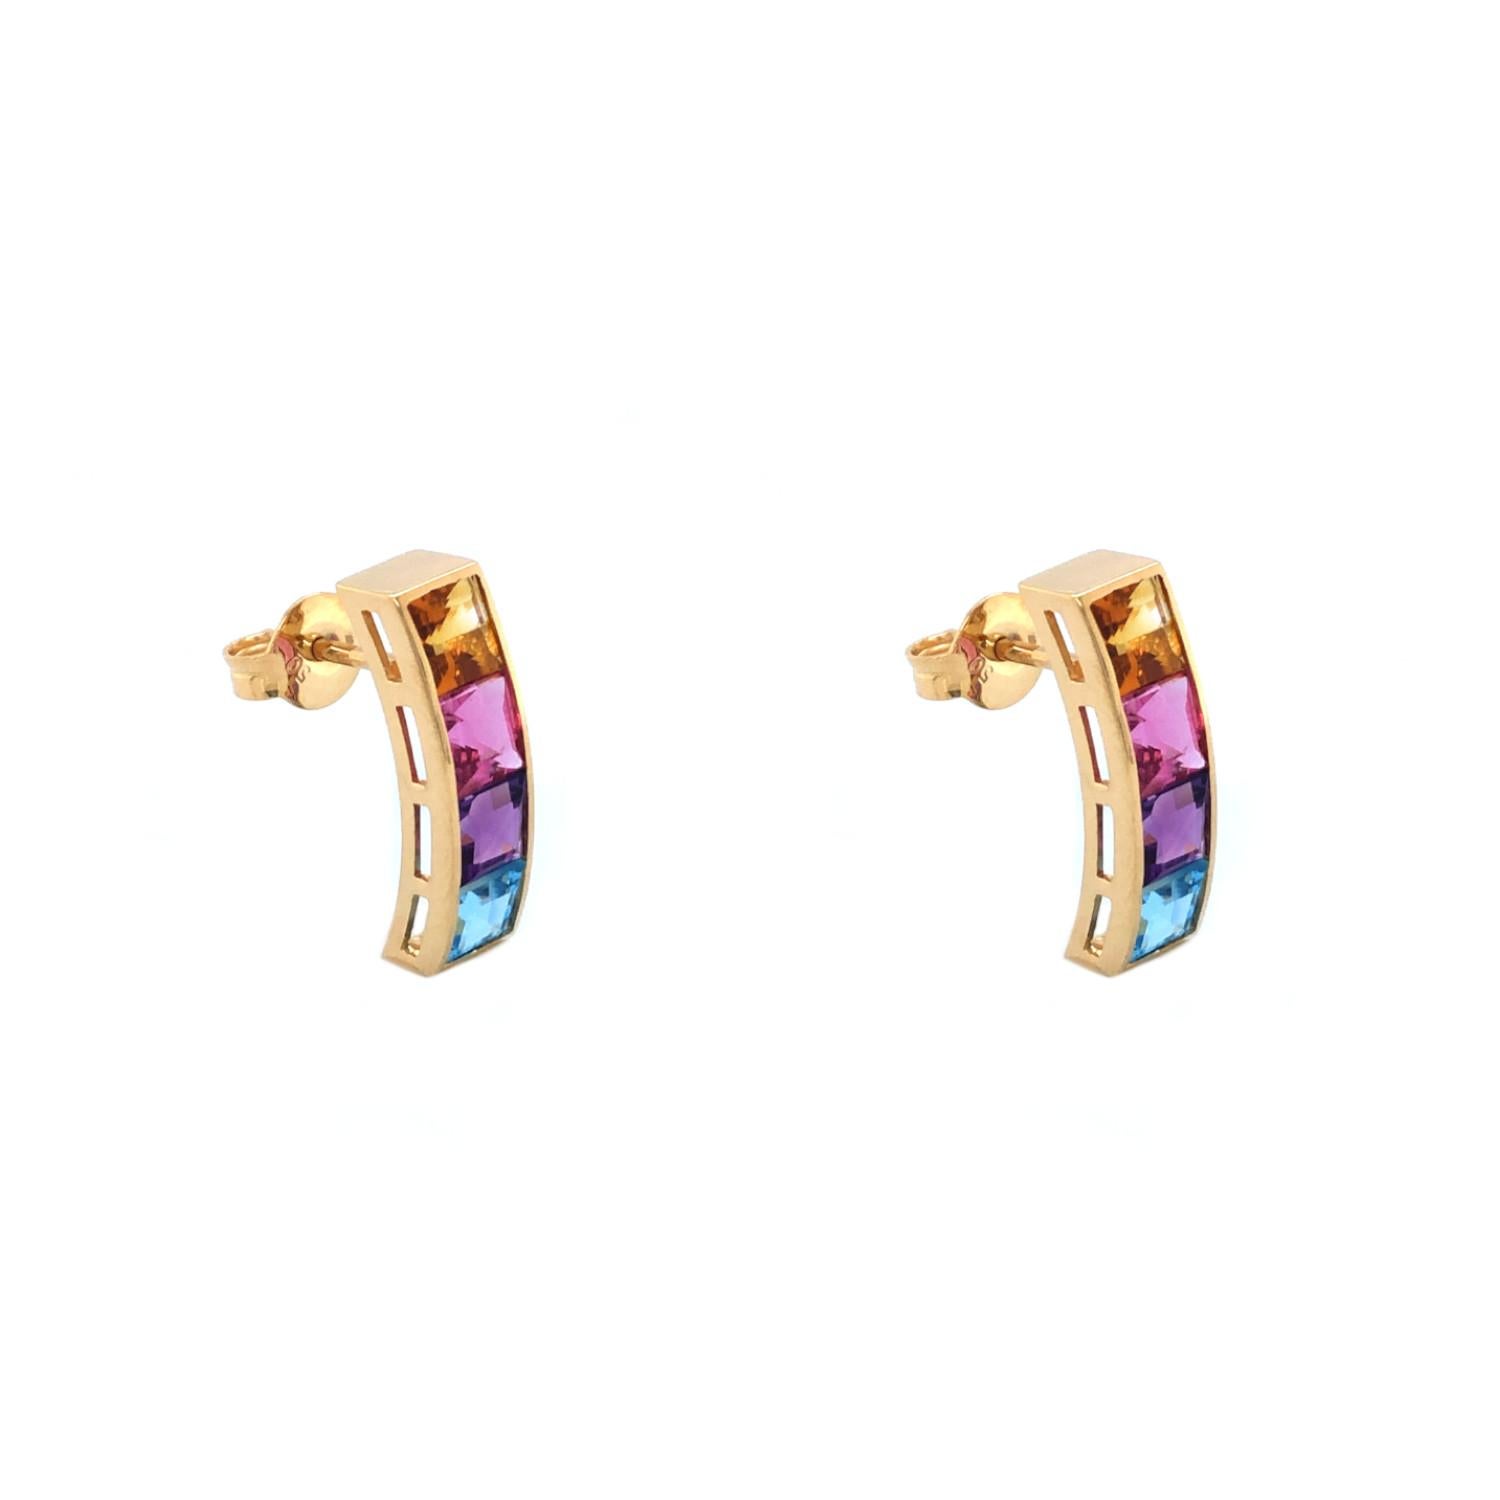 The ArtOuro Mix Earrings have been crafted with beautiful gemstones (2.88cts) and solid 18k yellow gold (2.10grs).

It is a unique piece for those who like to add a touch of boldness to their everyday looks with accessories featuring vibrant